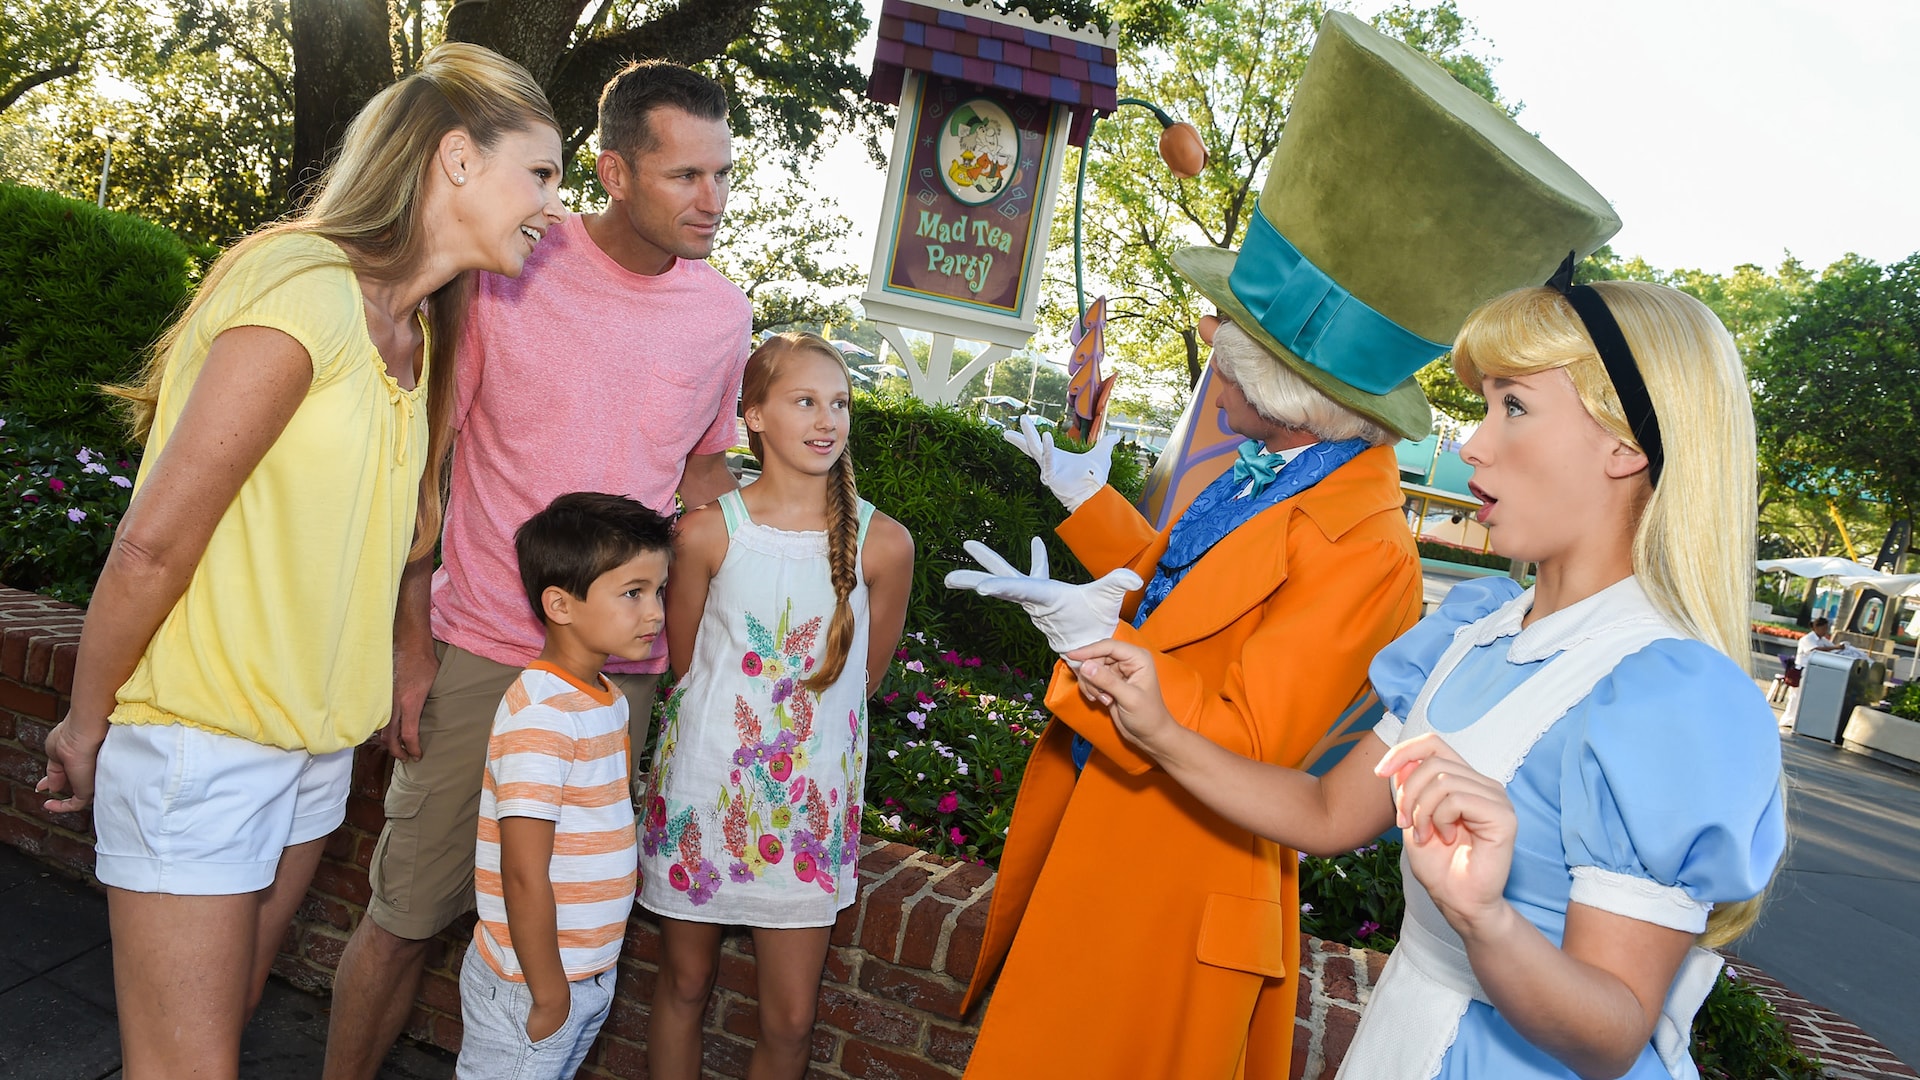 Characters From Alice In Wonderland At Mad Tea Party Walt Disney World Resort